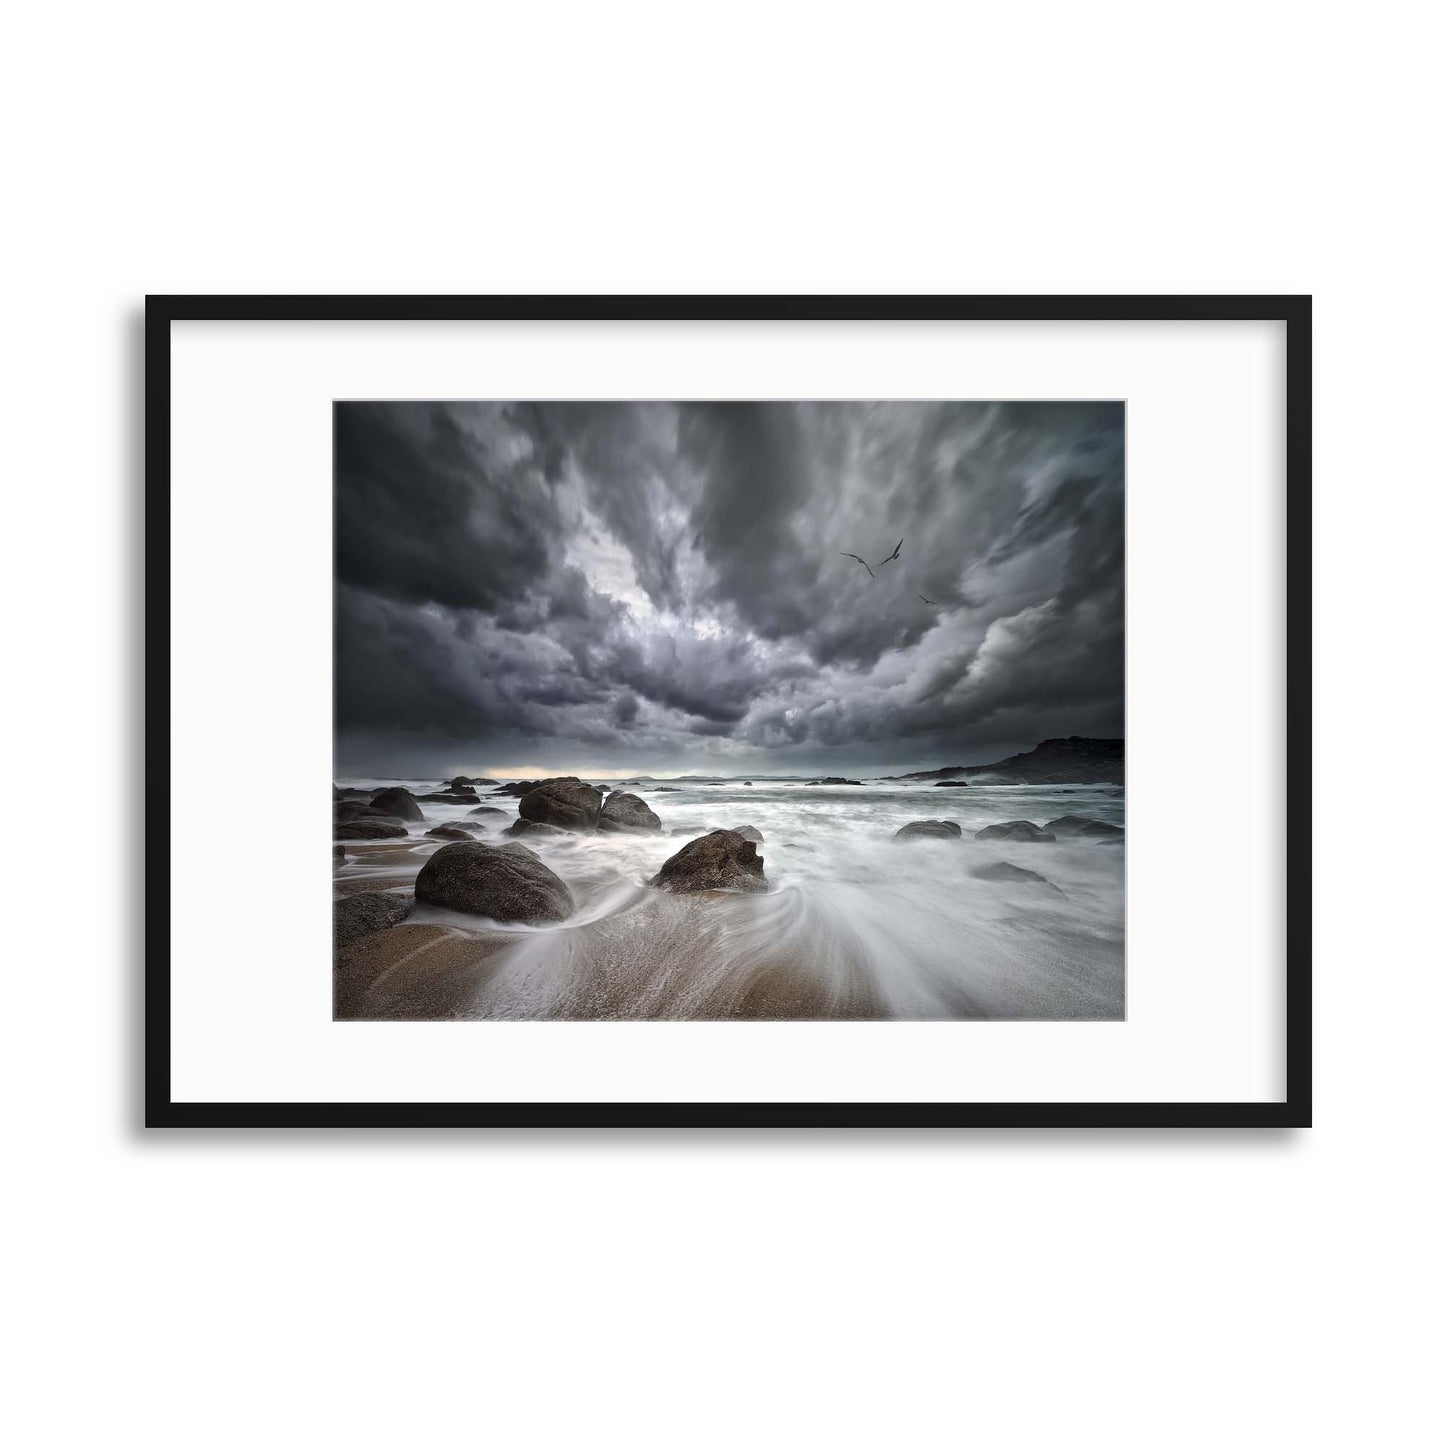 Flight over Troubled Waters by Santiago Pascual Buye Framed Print - USTAD HOME